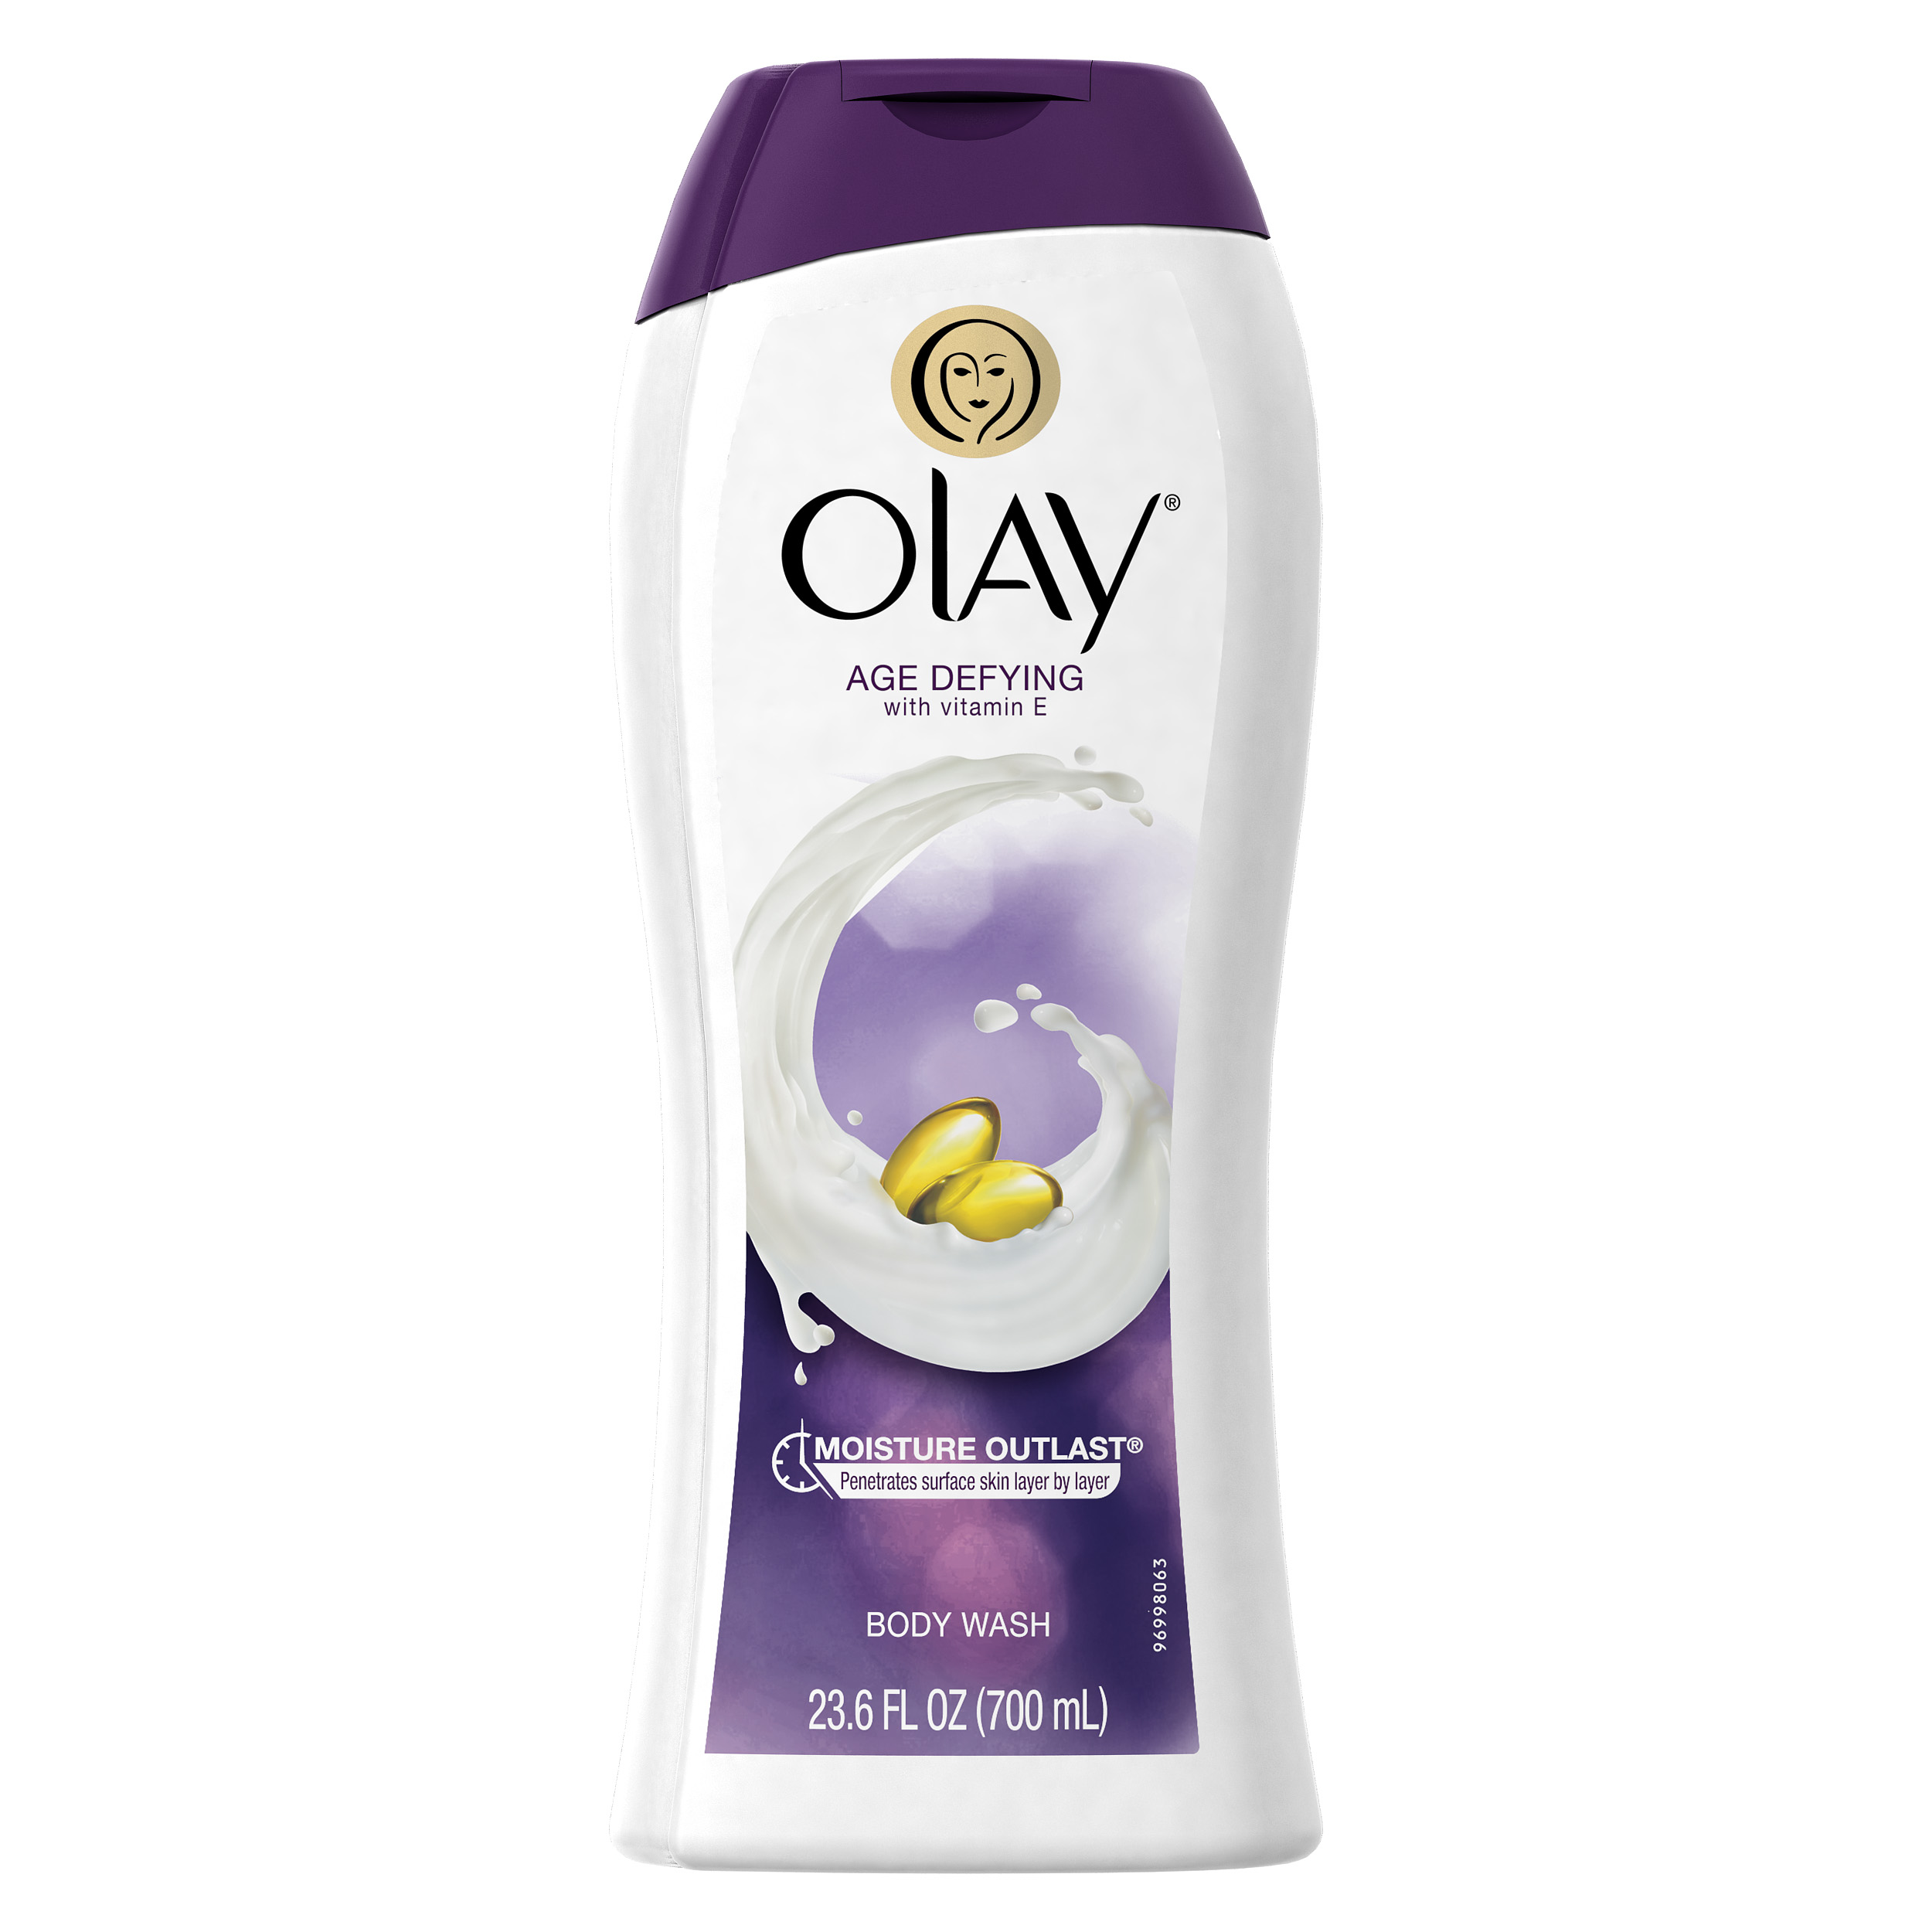 Olay Age Defying Body Wash With Vitamin E 23.6oz - image 1 of 5